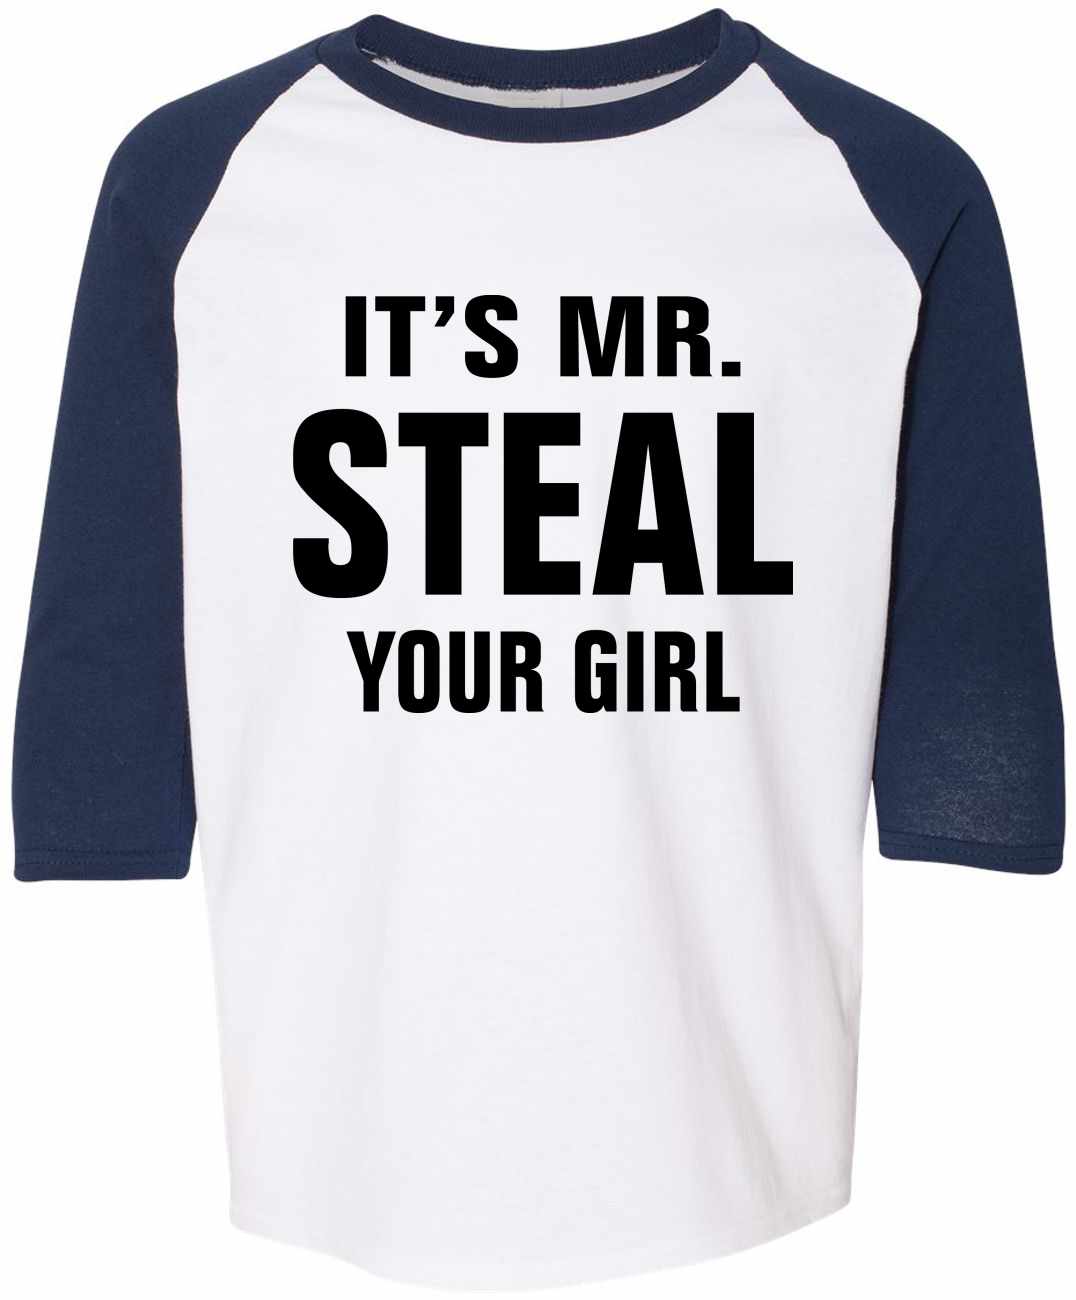 IT'S MR. STEAL YOUR GIRL on Youth Baseball Shirt